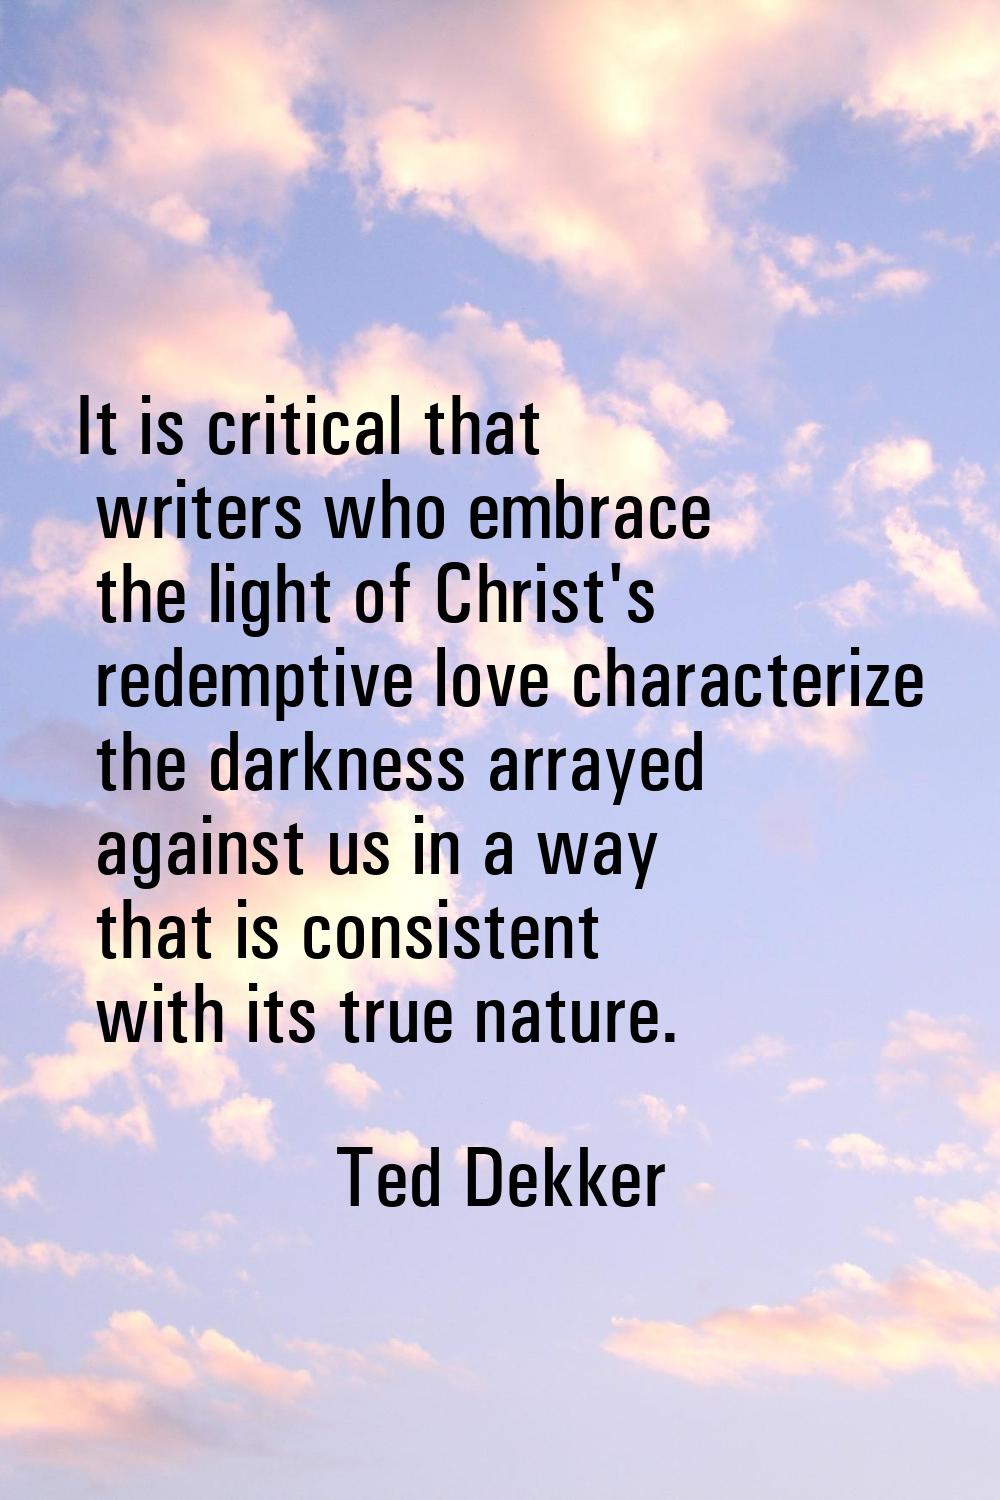 It is critical that writers who embrace the light of Christ's redemptive love characterize the dark